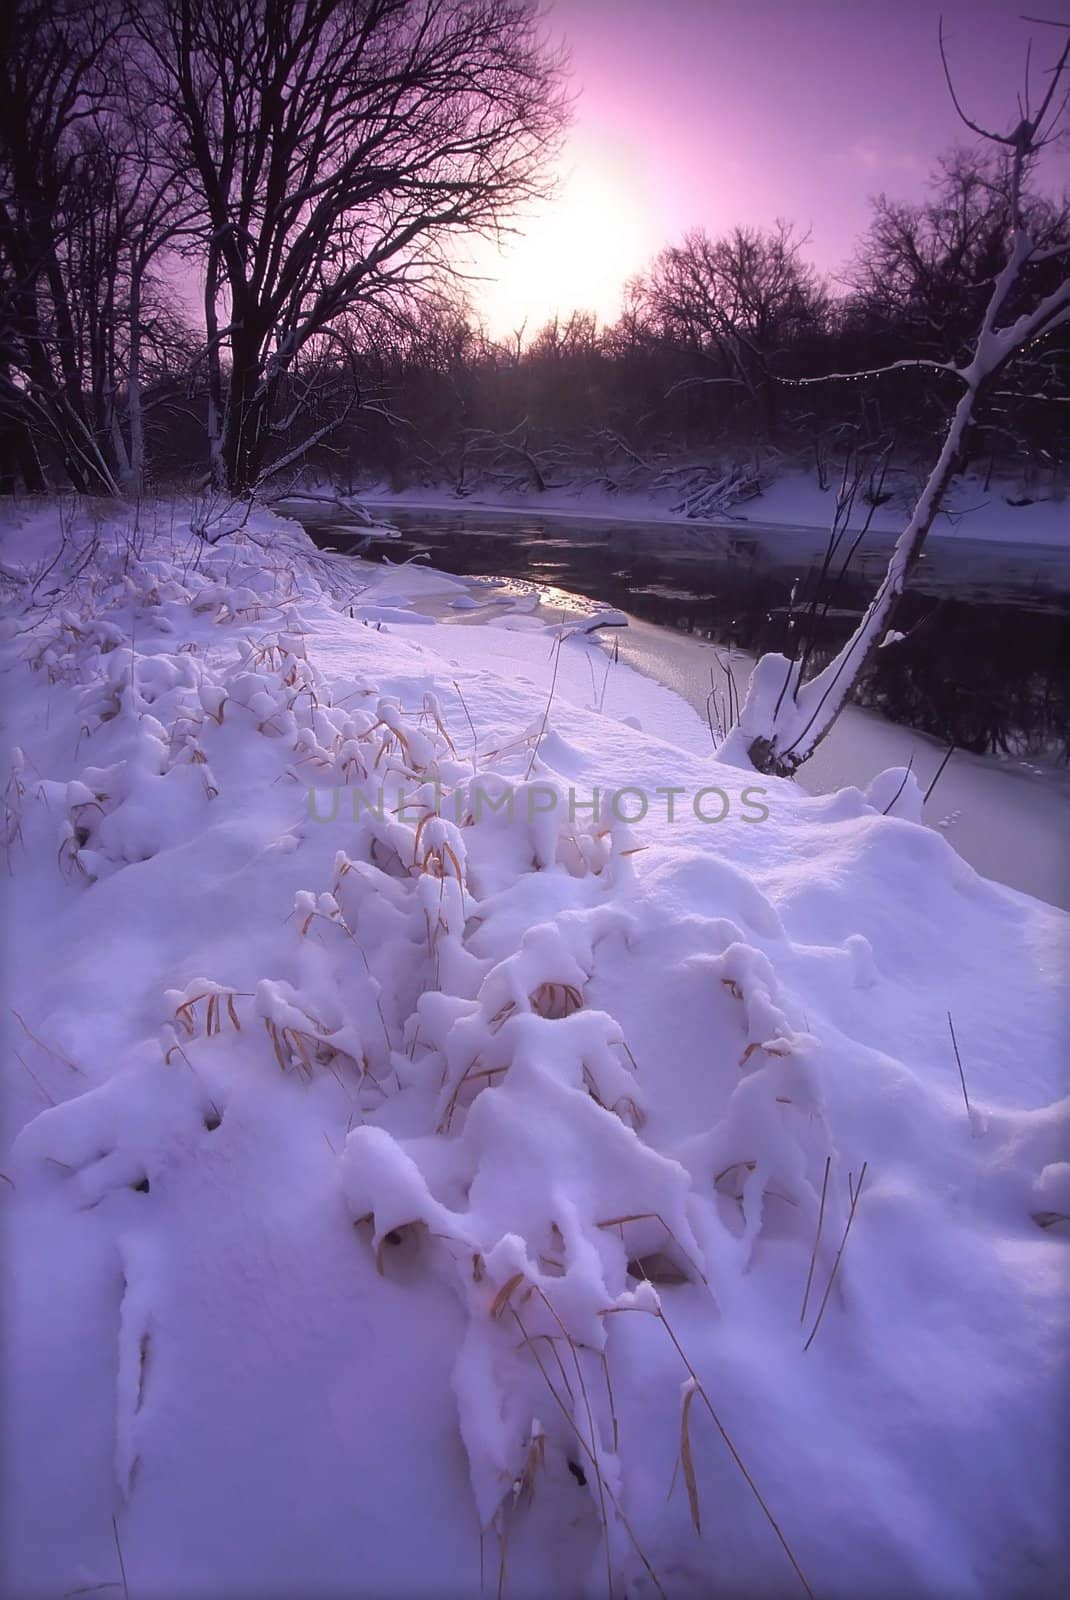 The sun rises over fresh snowfall at Blackhawk Springs Forest Preserve in northern Illinois.